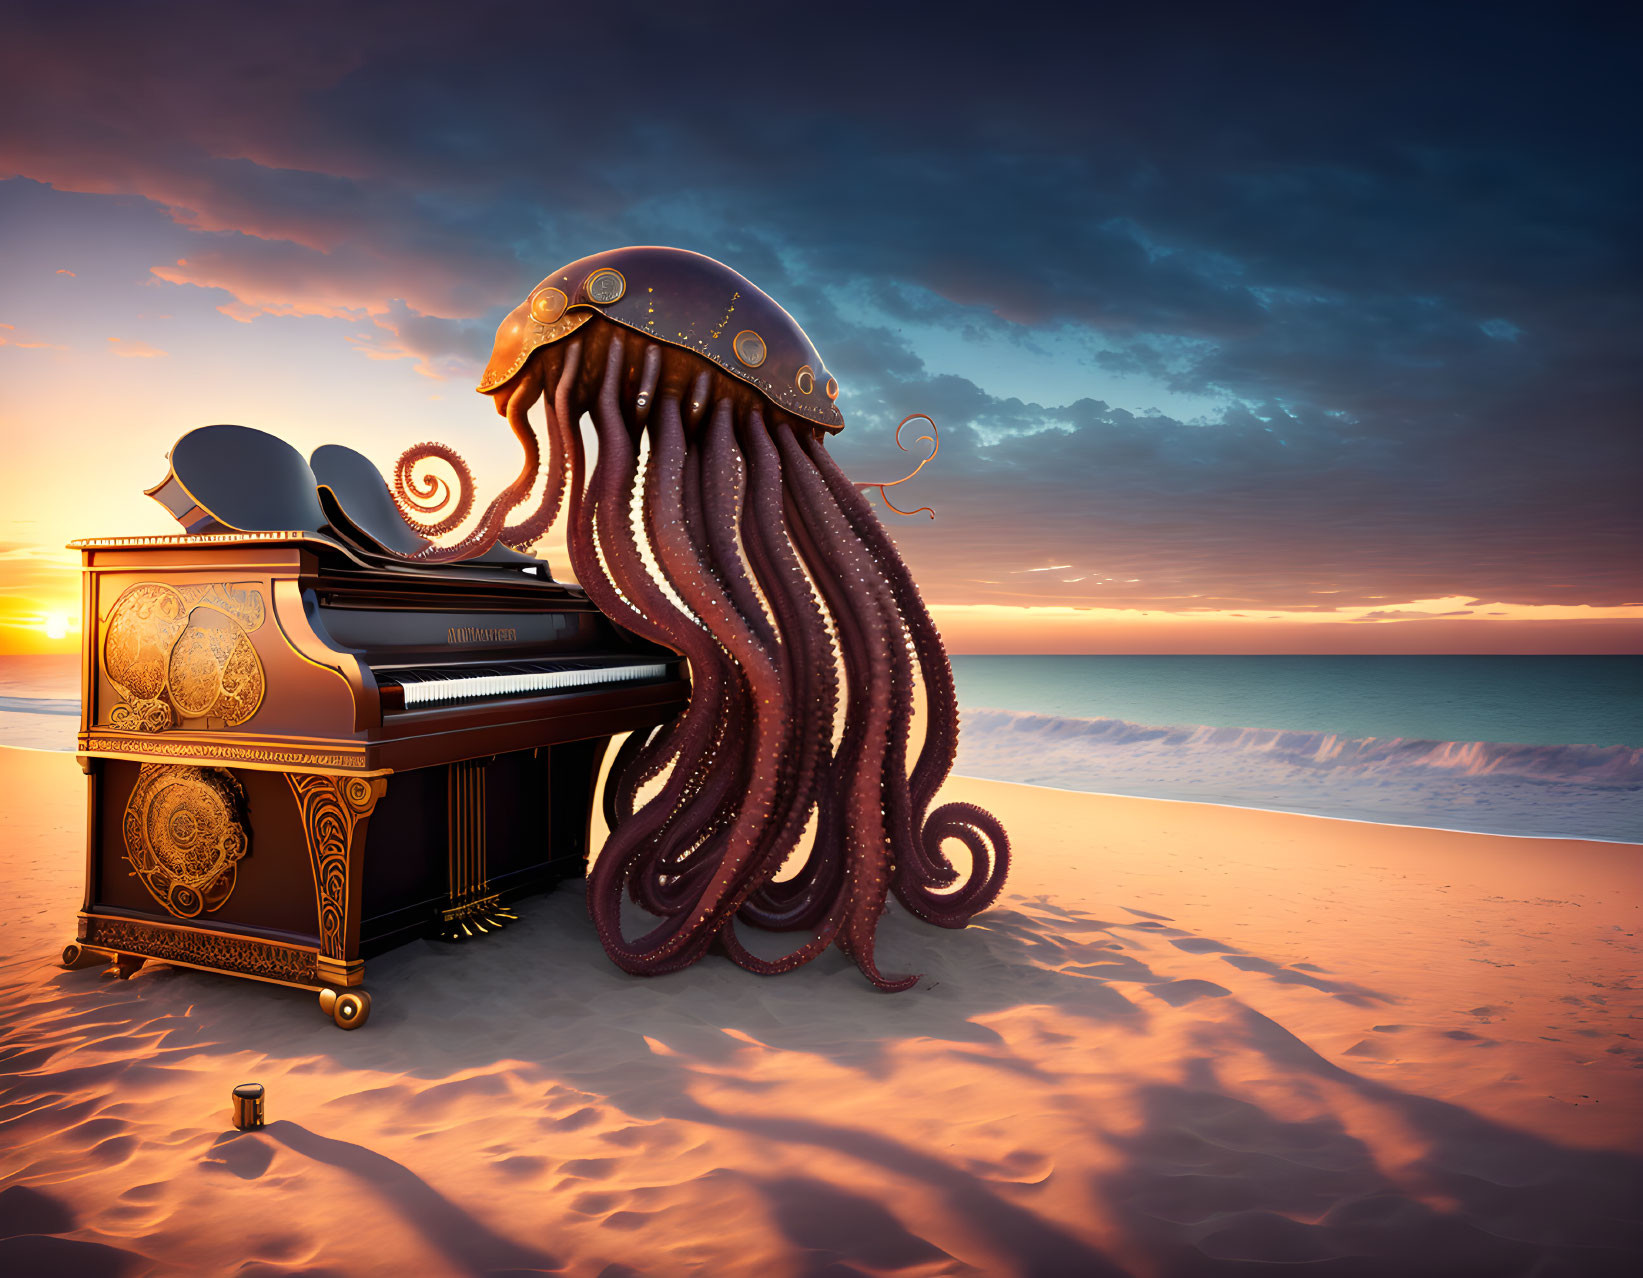 Octopus in brass helmet on grand piano at beach sunset